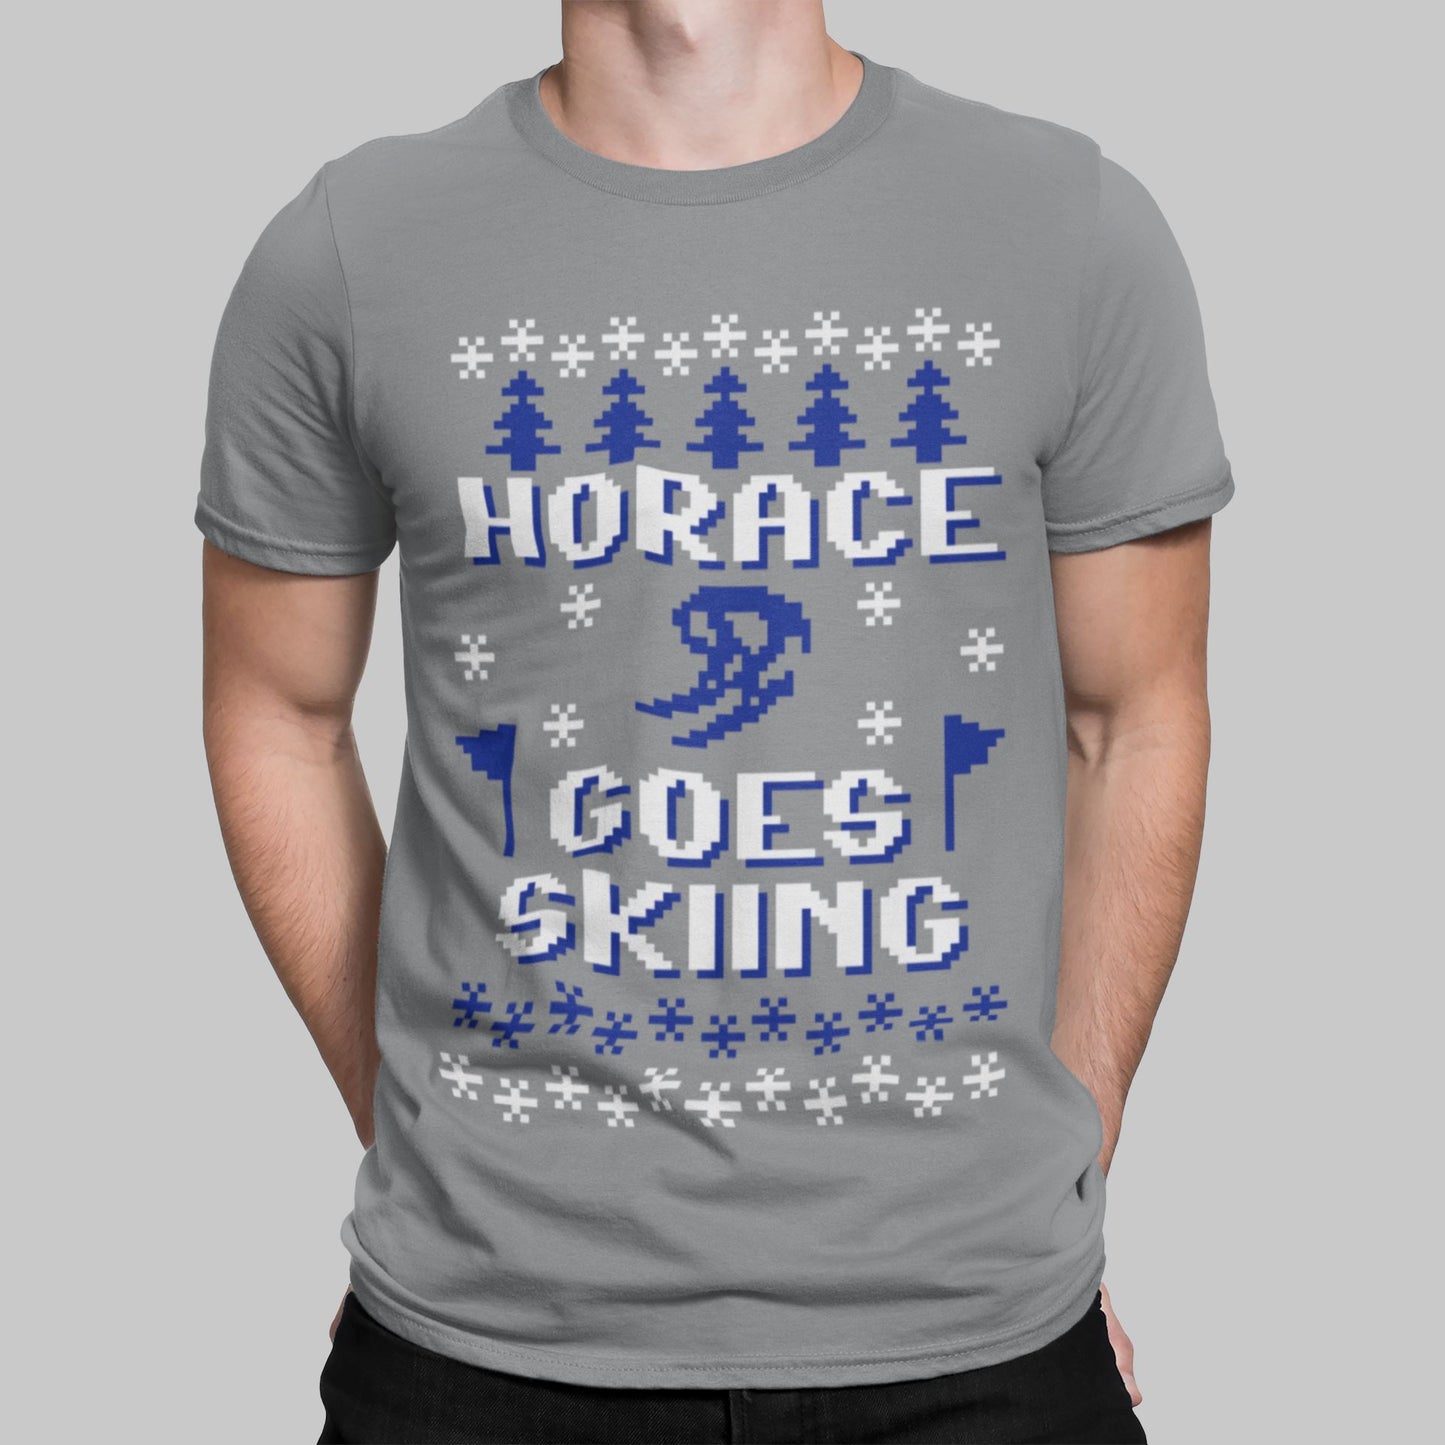 Horace Goes Skiing Retro Gaming T-Shirt T-Shirt Seven Squared Small 34-36" Sport Grey 